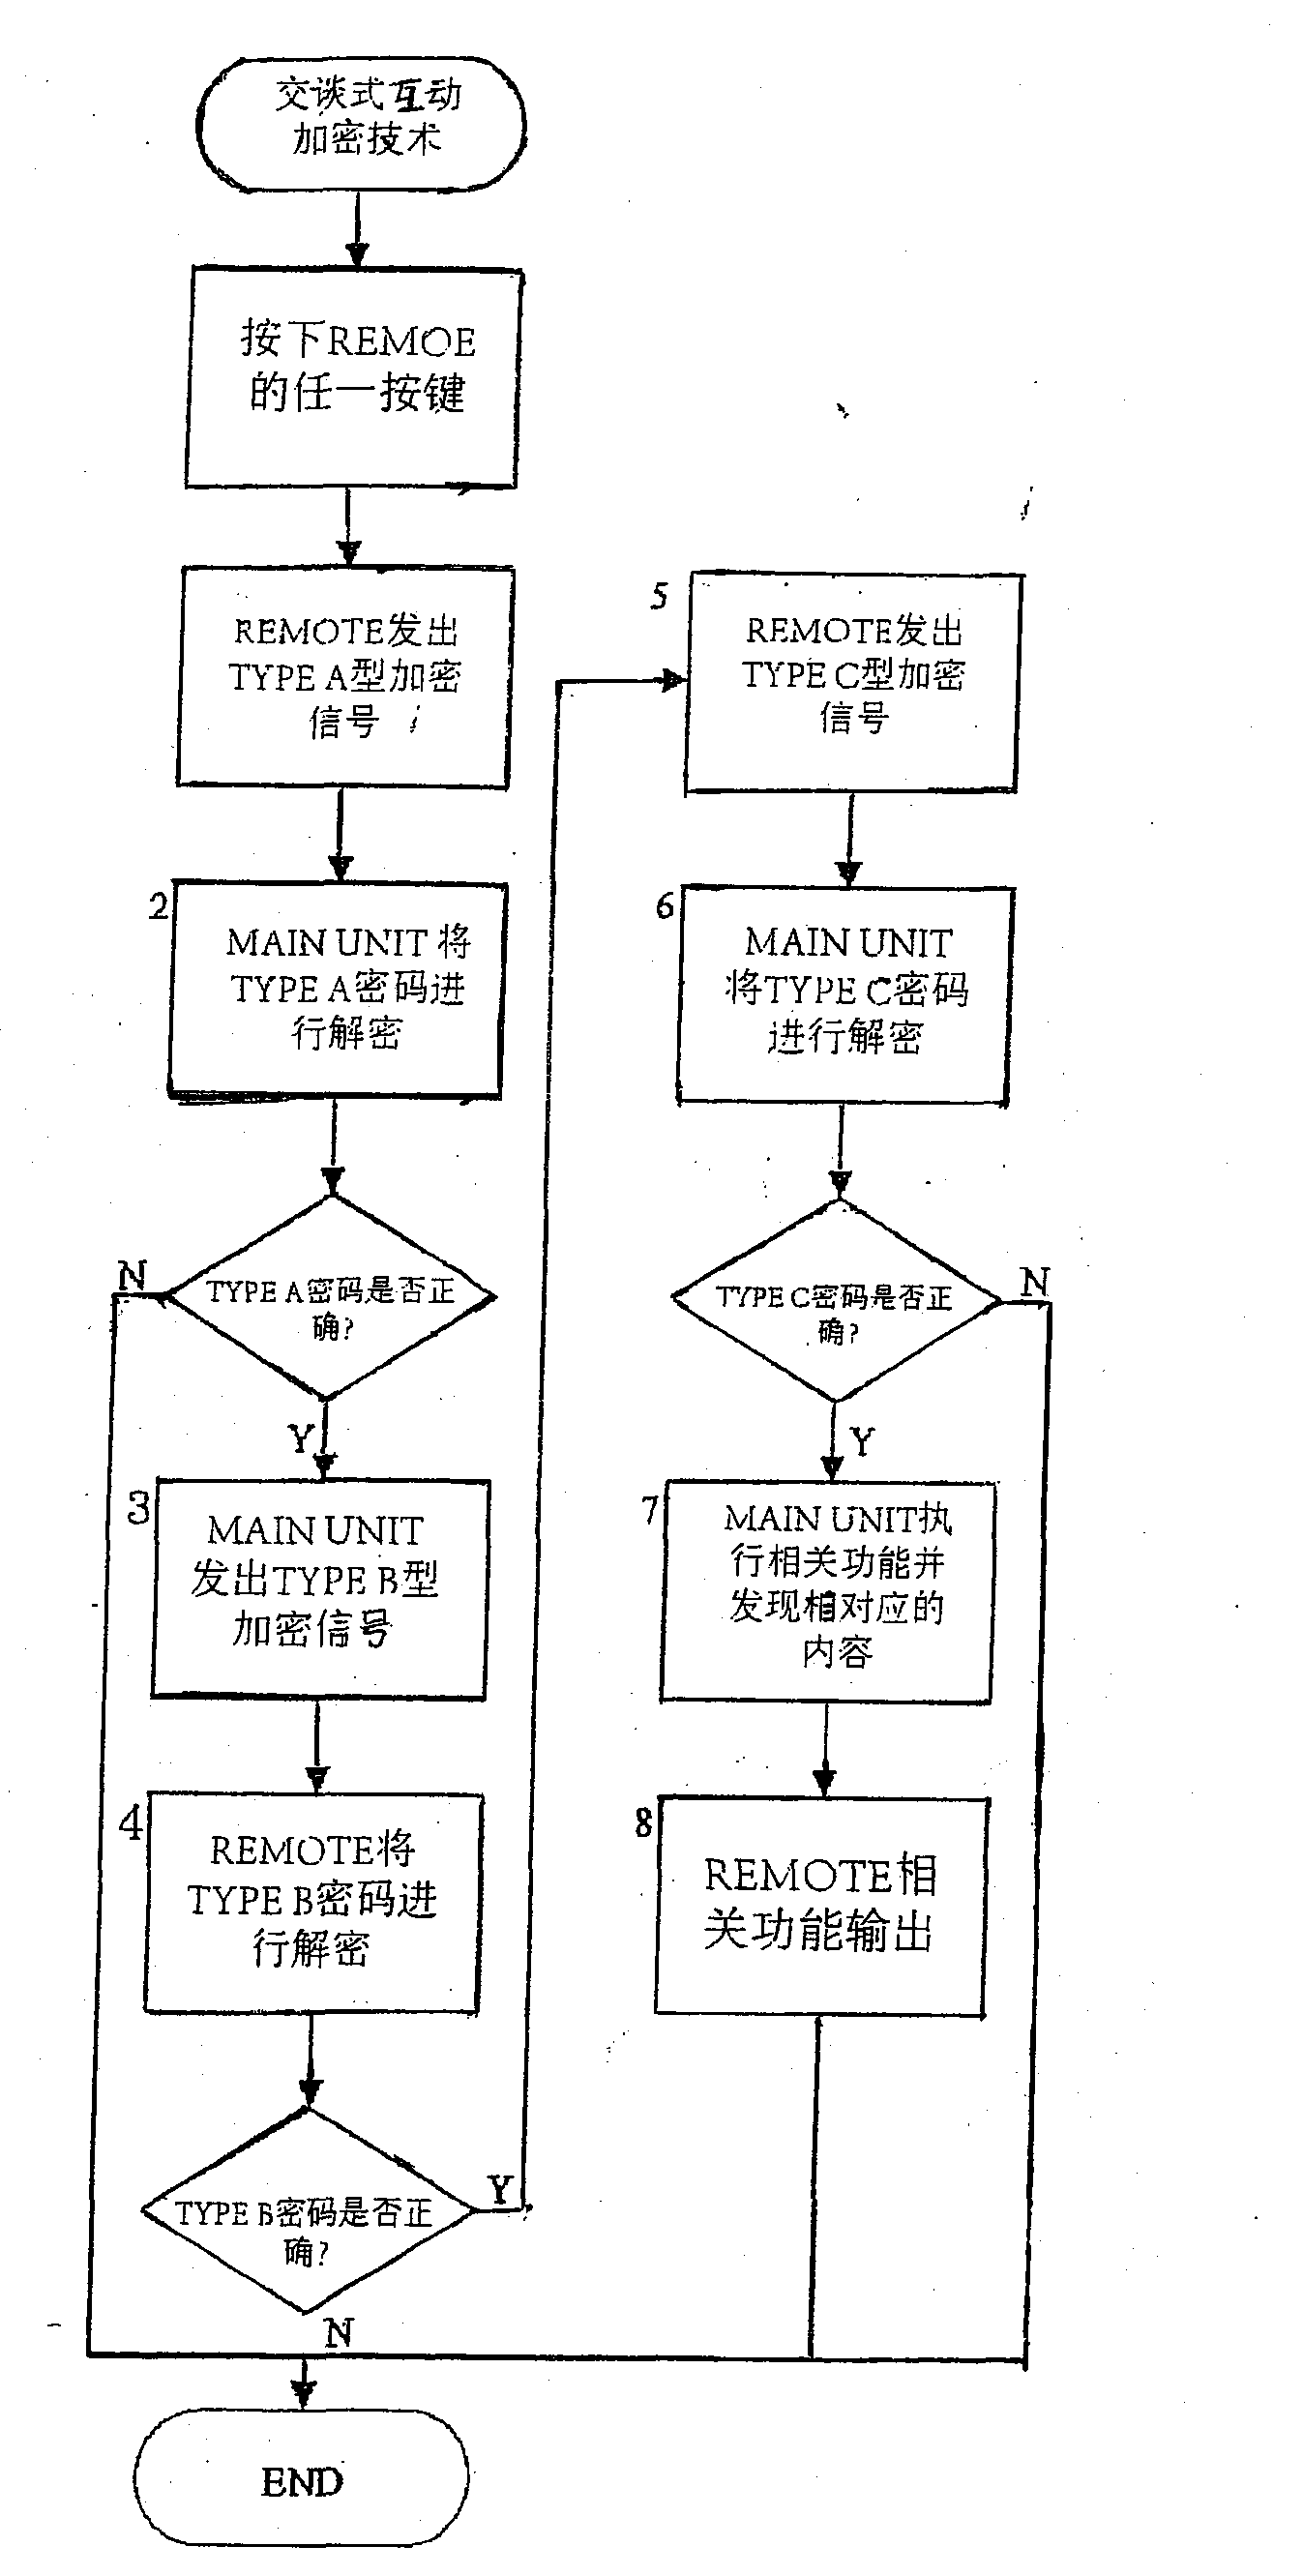 Remote control system and method for interference prevention, stealing copy prevention and RF signal stability improvement